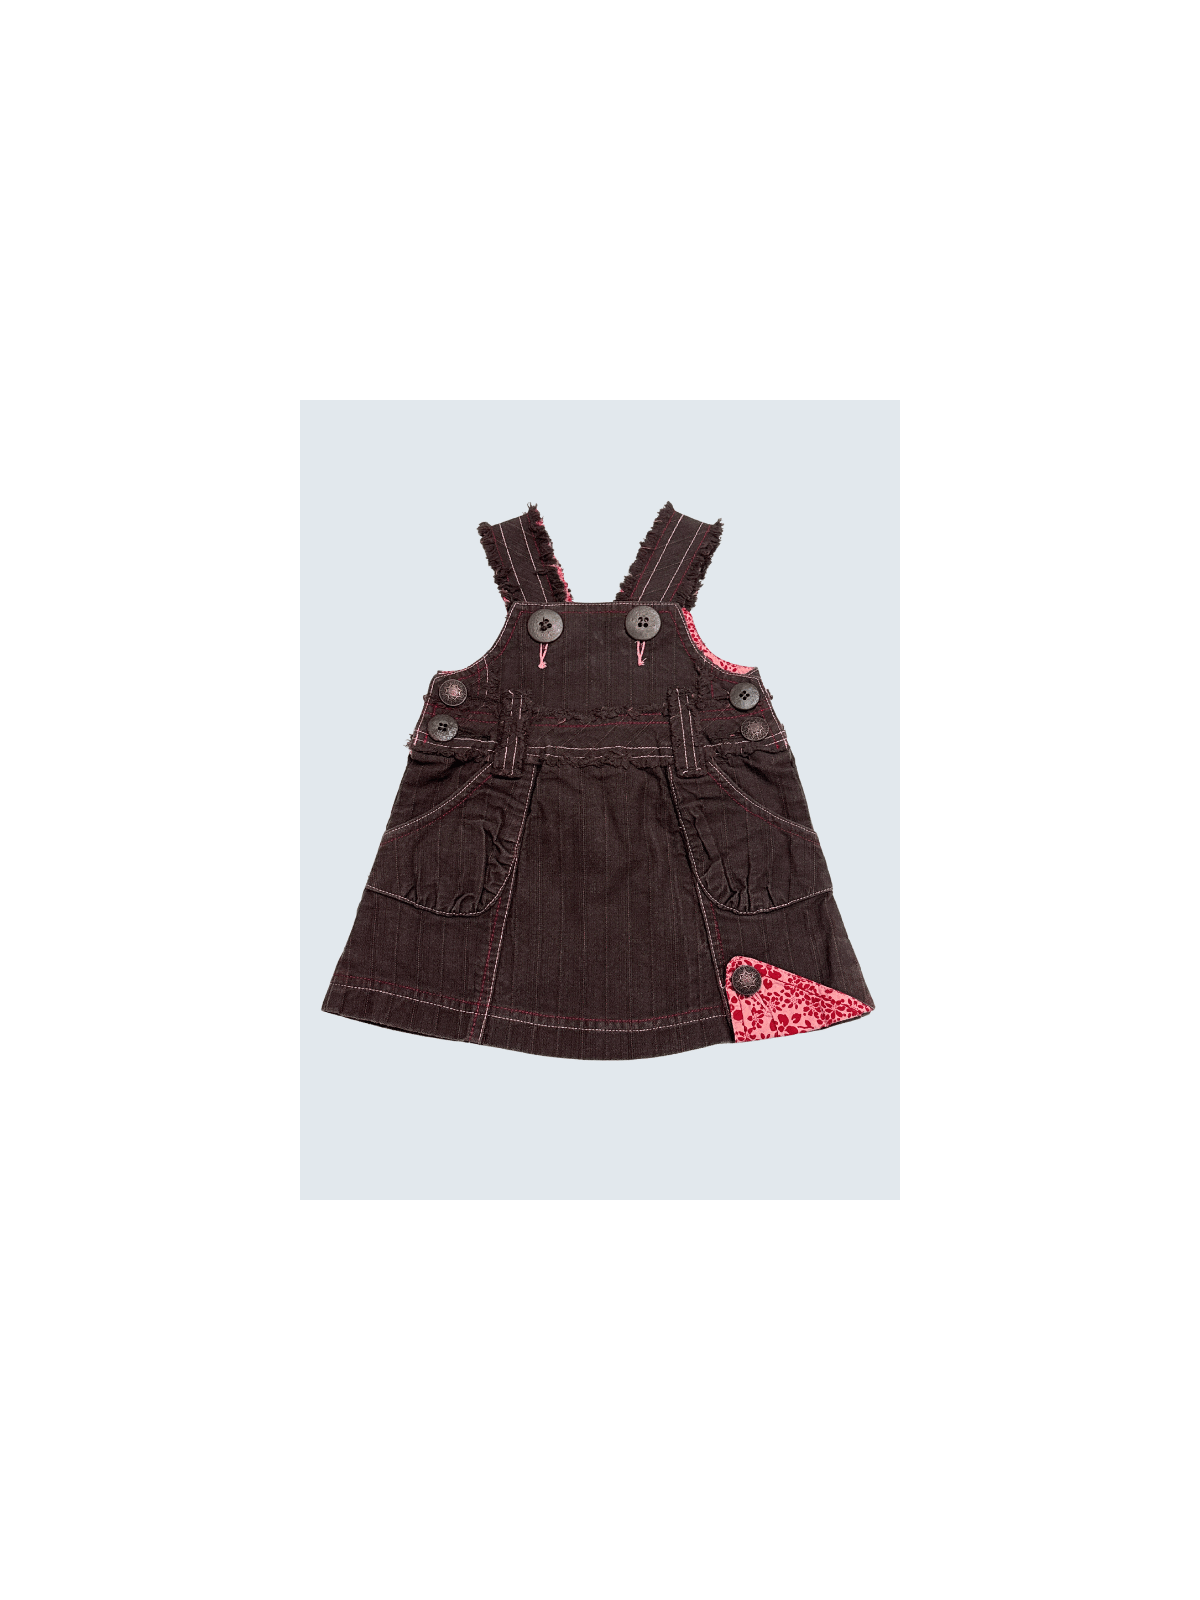 Robe d'occasion Kenzo 6 Mois pour fille.